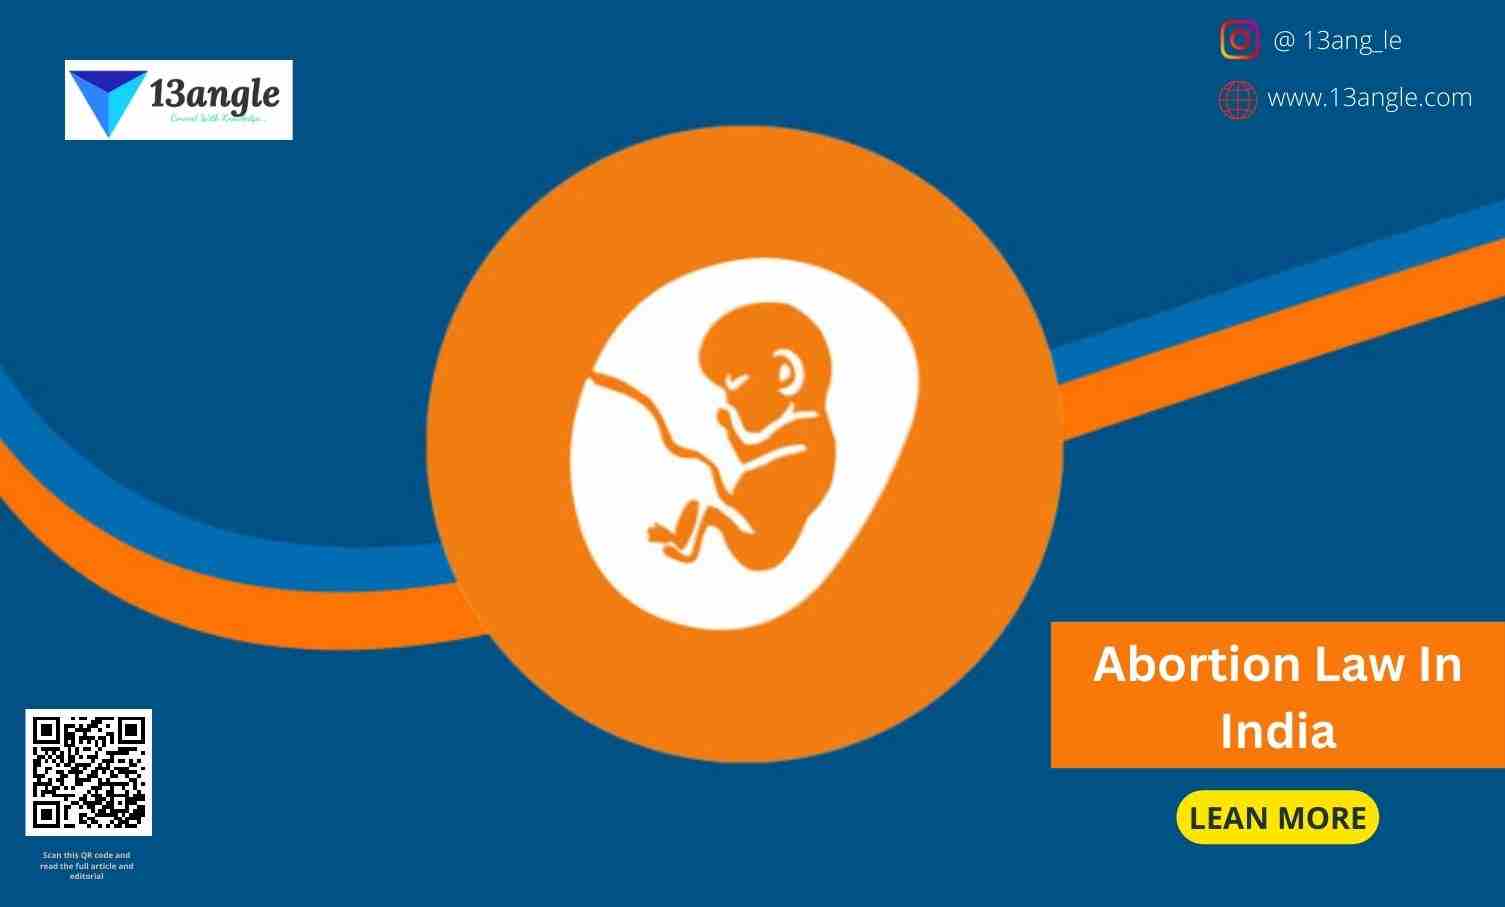 Abortion Law In India- 13angle.com